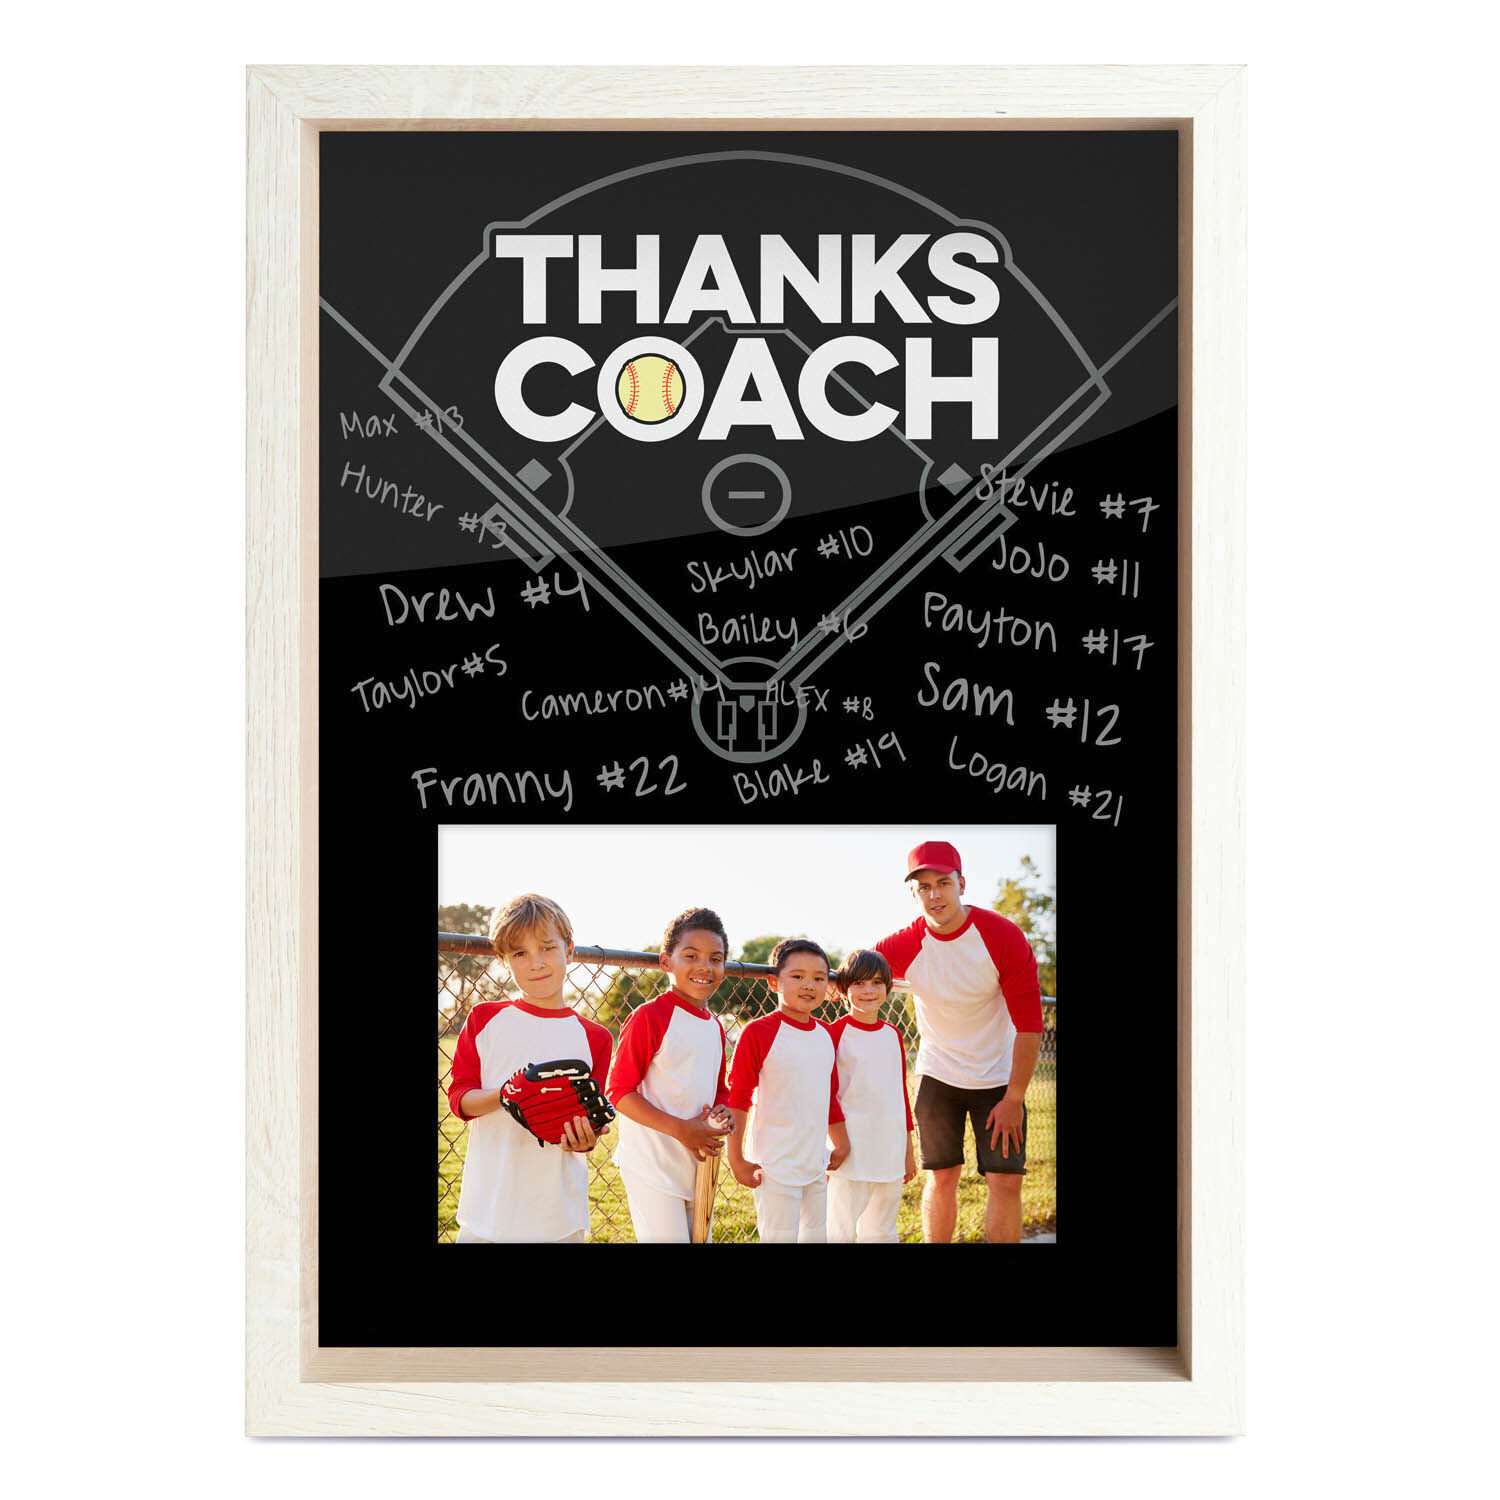 Personalized Gift Gift For Baseball Coach Surprise For Favorite Coaches Appreciation Custom Mug Present For Friends Family Coworkers